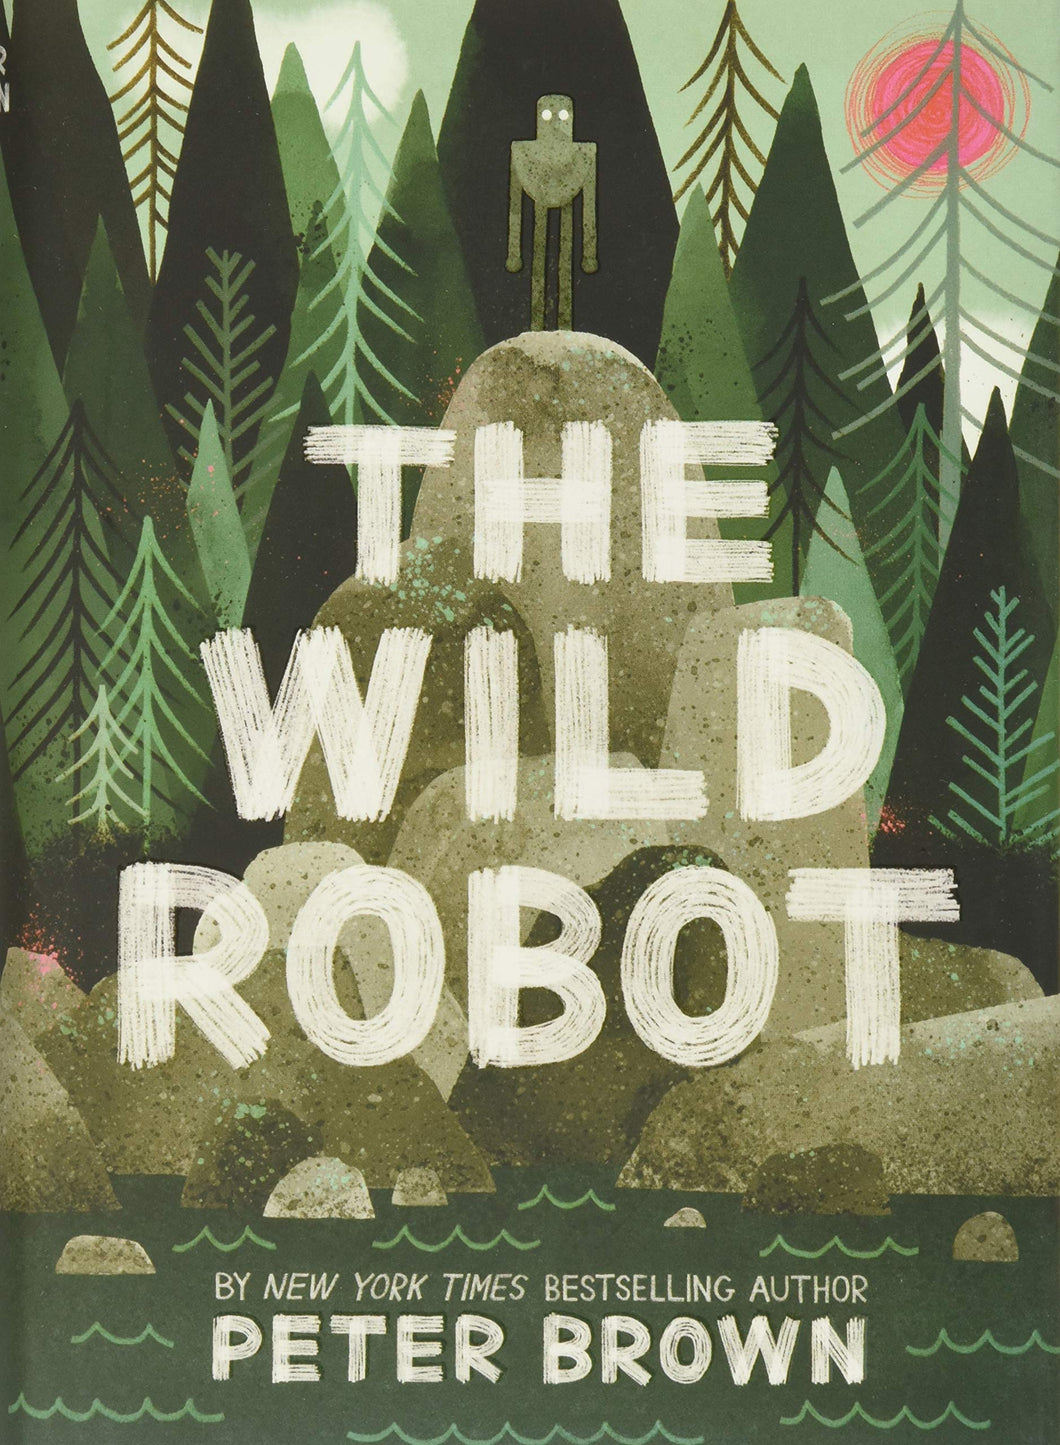 The Wild Robot by Peter Brown / Hardcover or Paperback - NEW BOOK OR BOOK BUNDLE